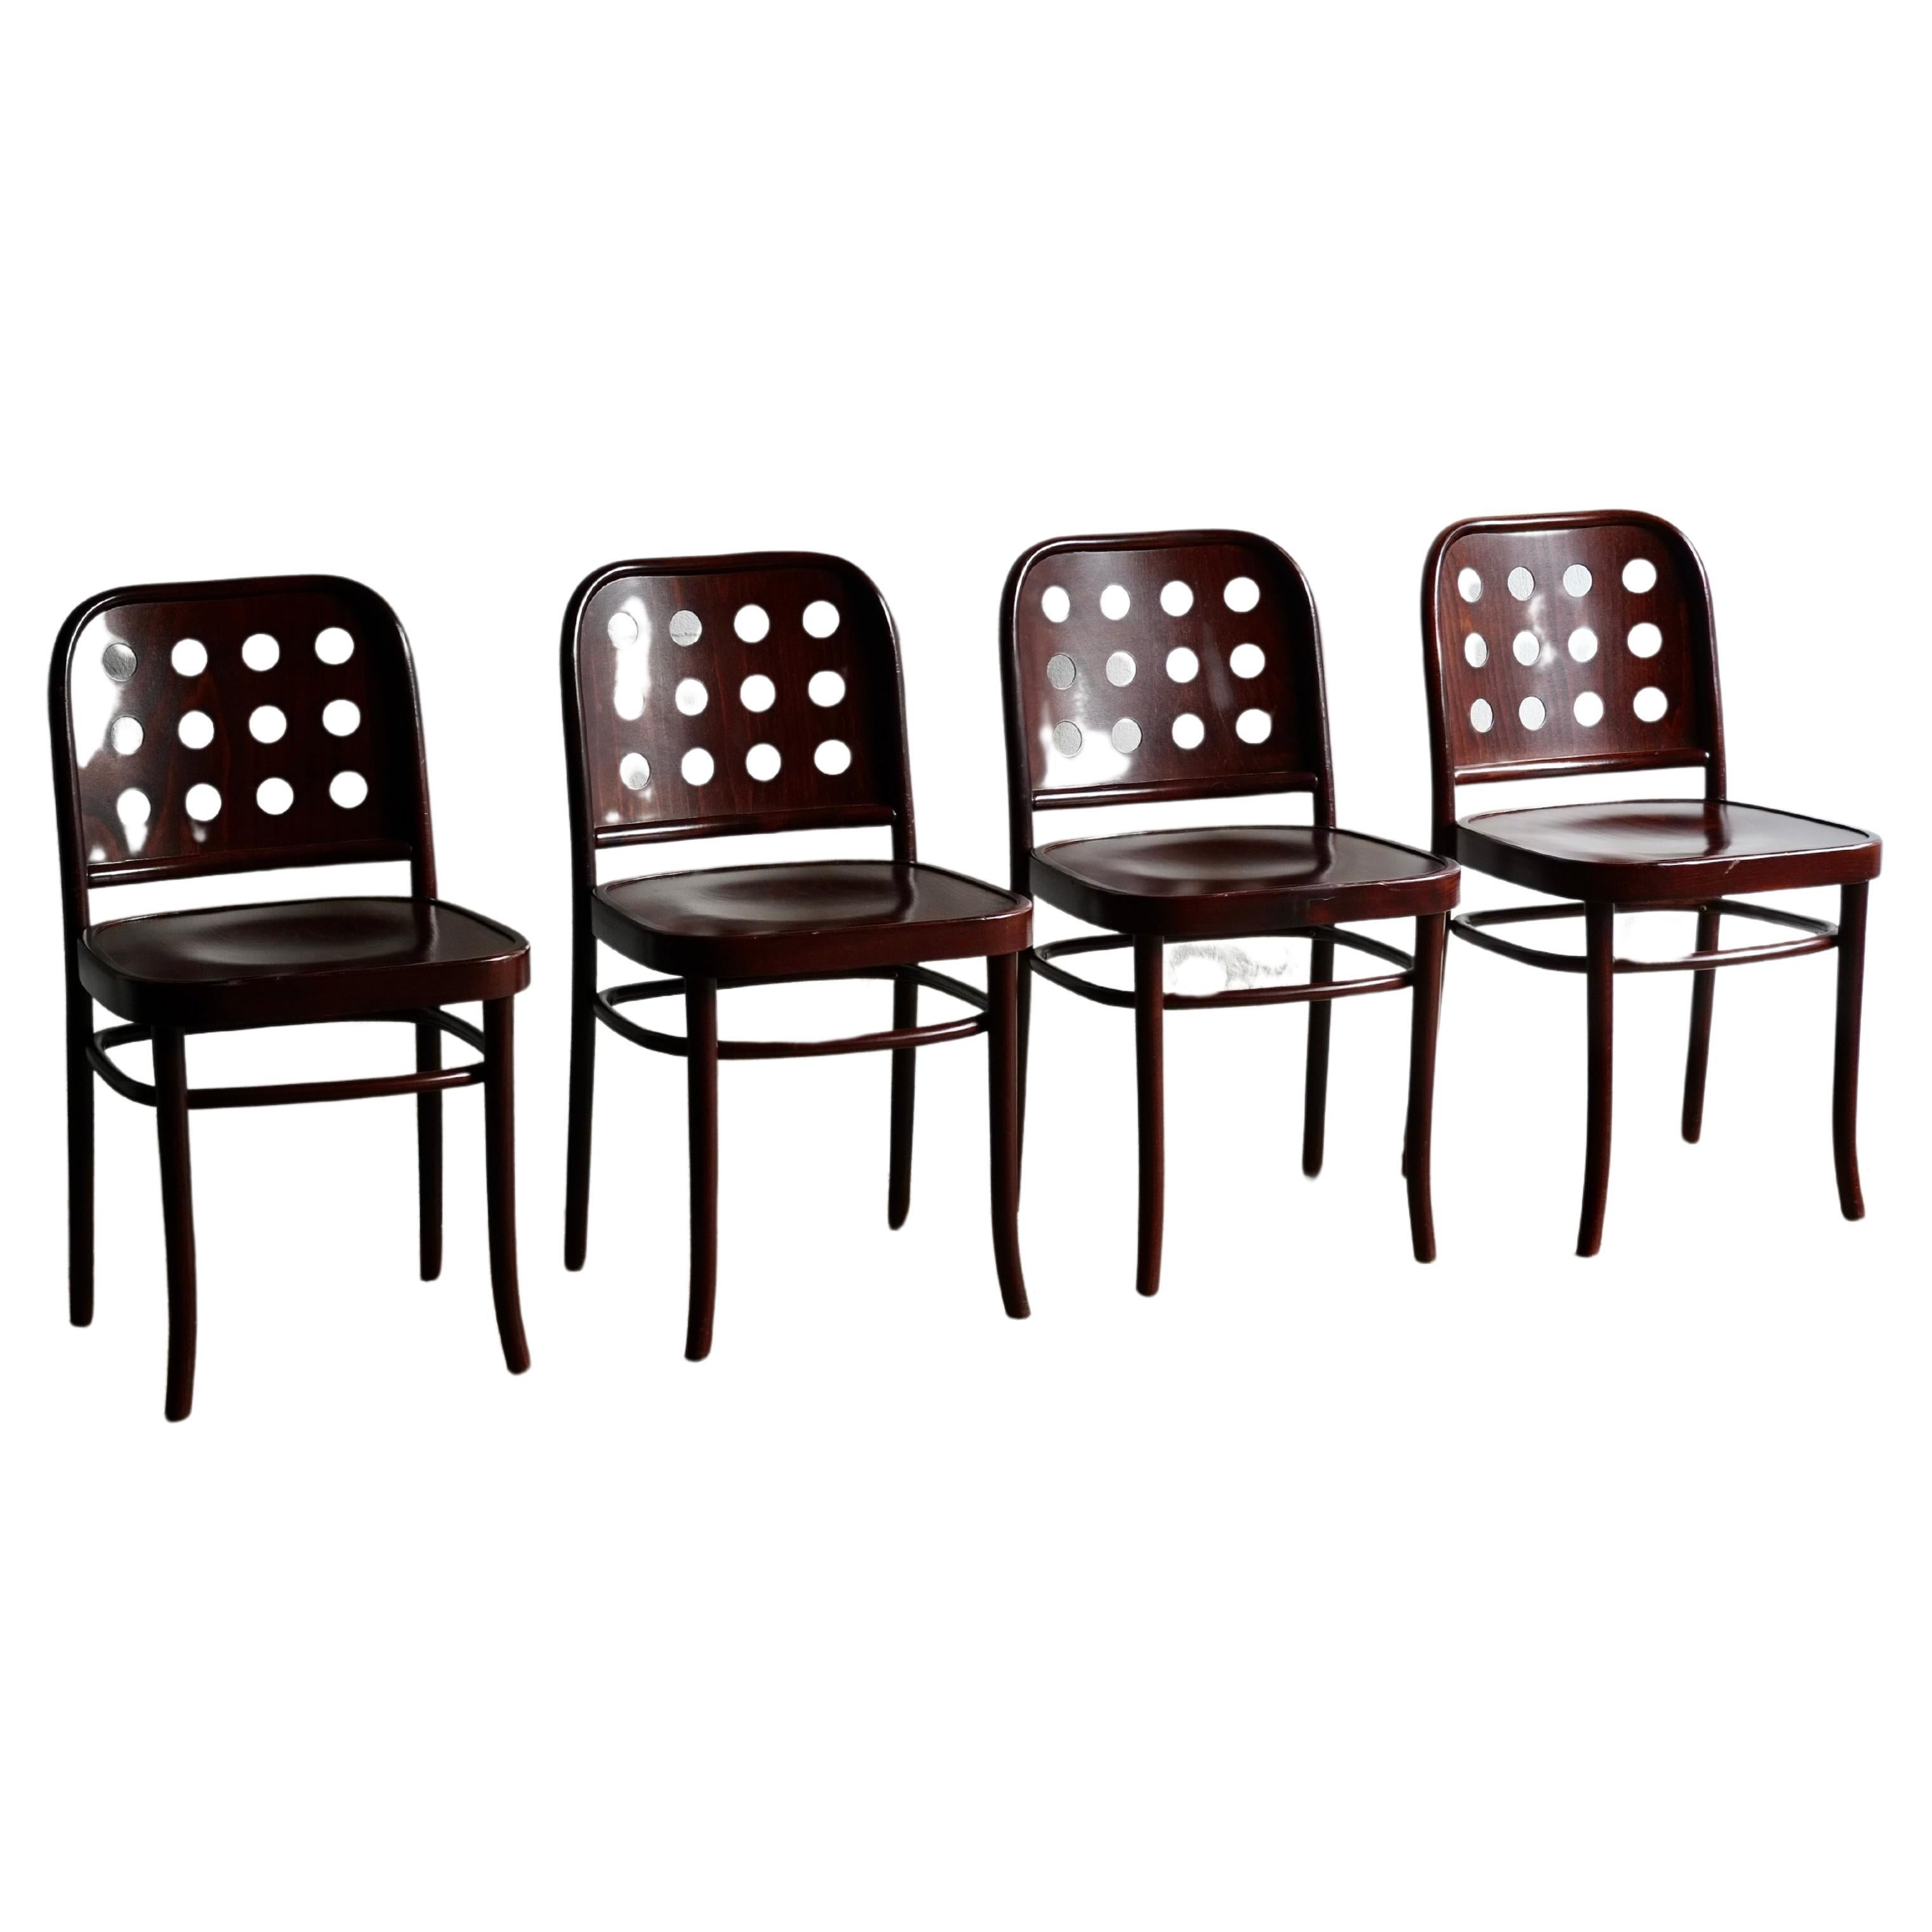 Josef Hoffmann A6010 Style Dining Chairs